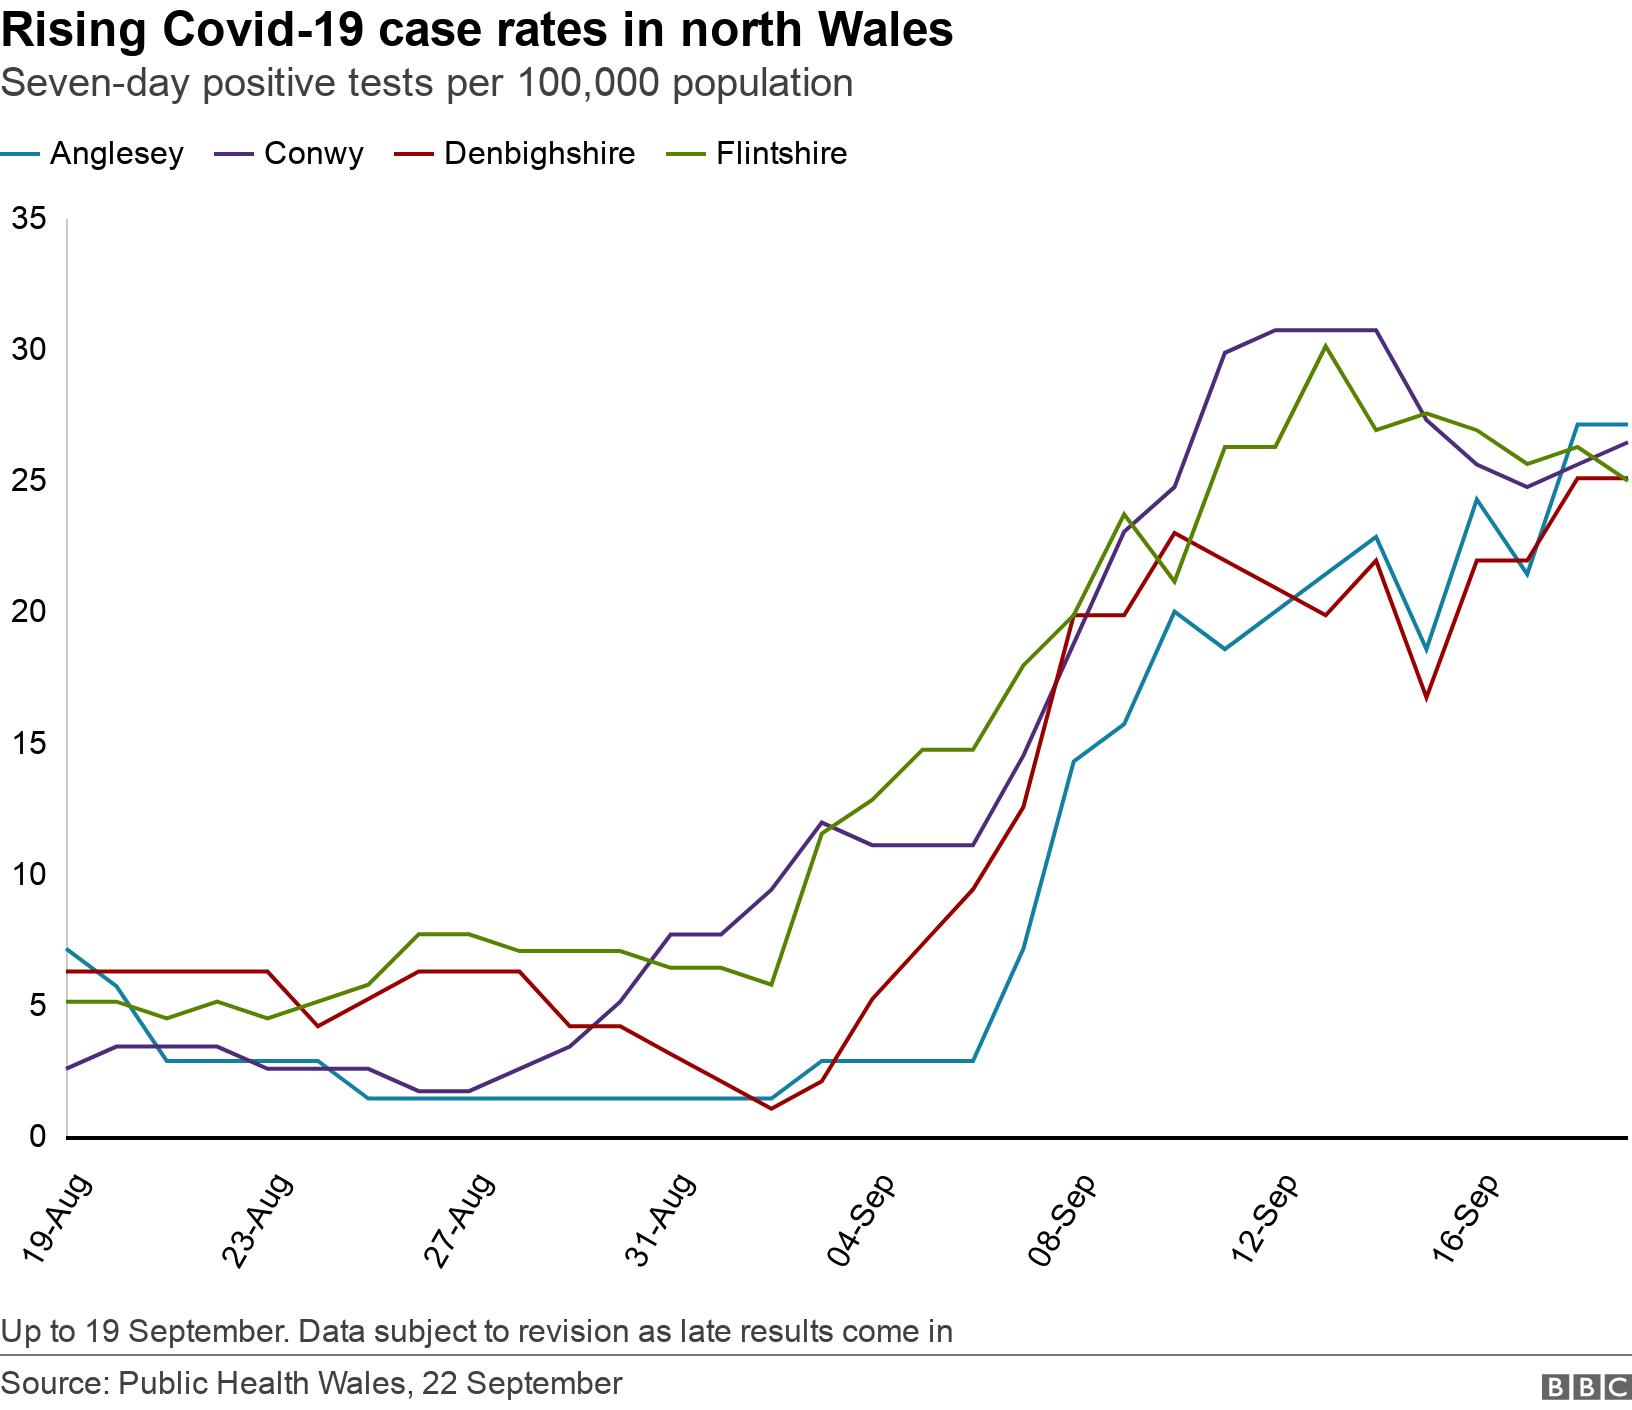 Rising Covid-19 case rates in north Wales. Seven-day positive tests per 100,000 population. Up to 19 September. Data subject to revision as late results come in.